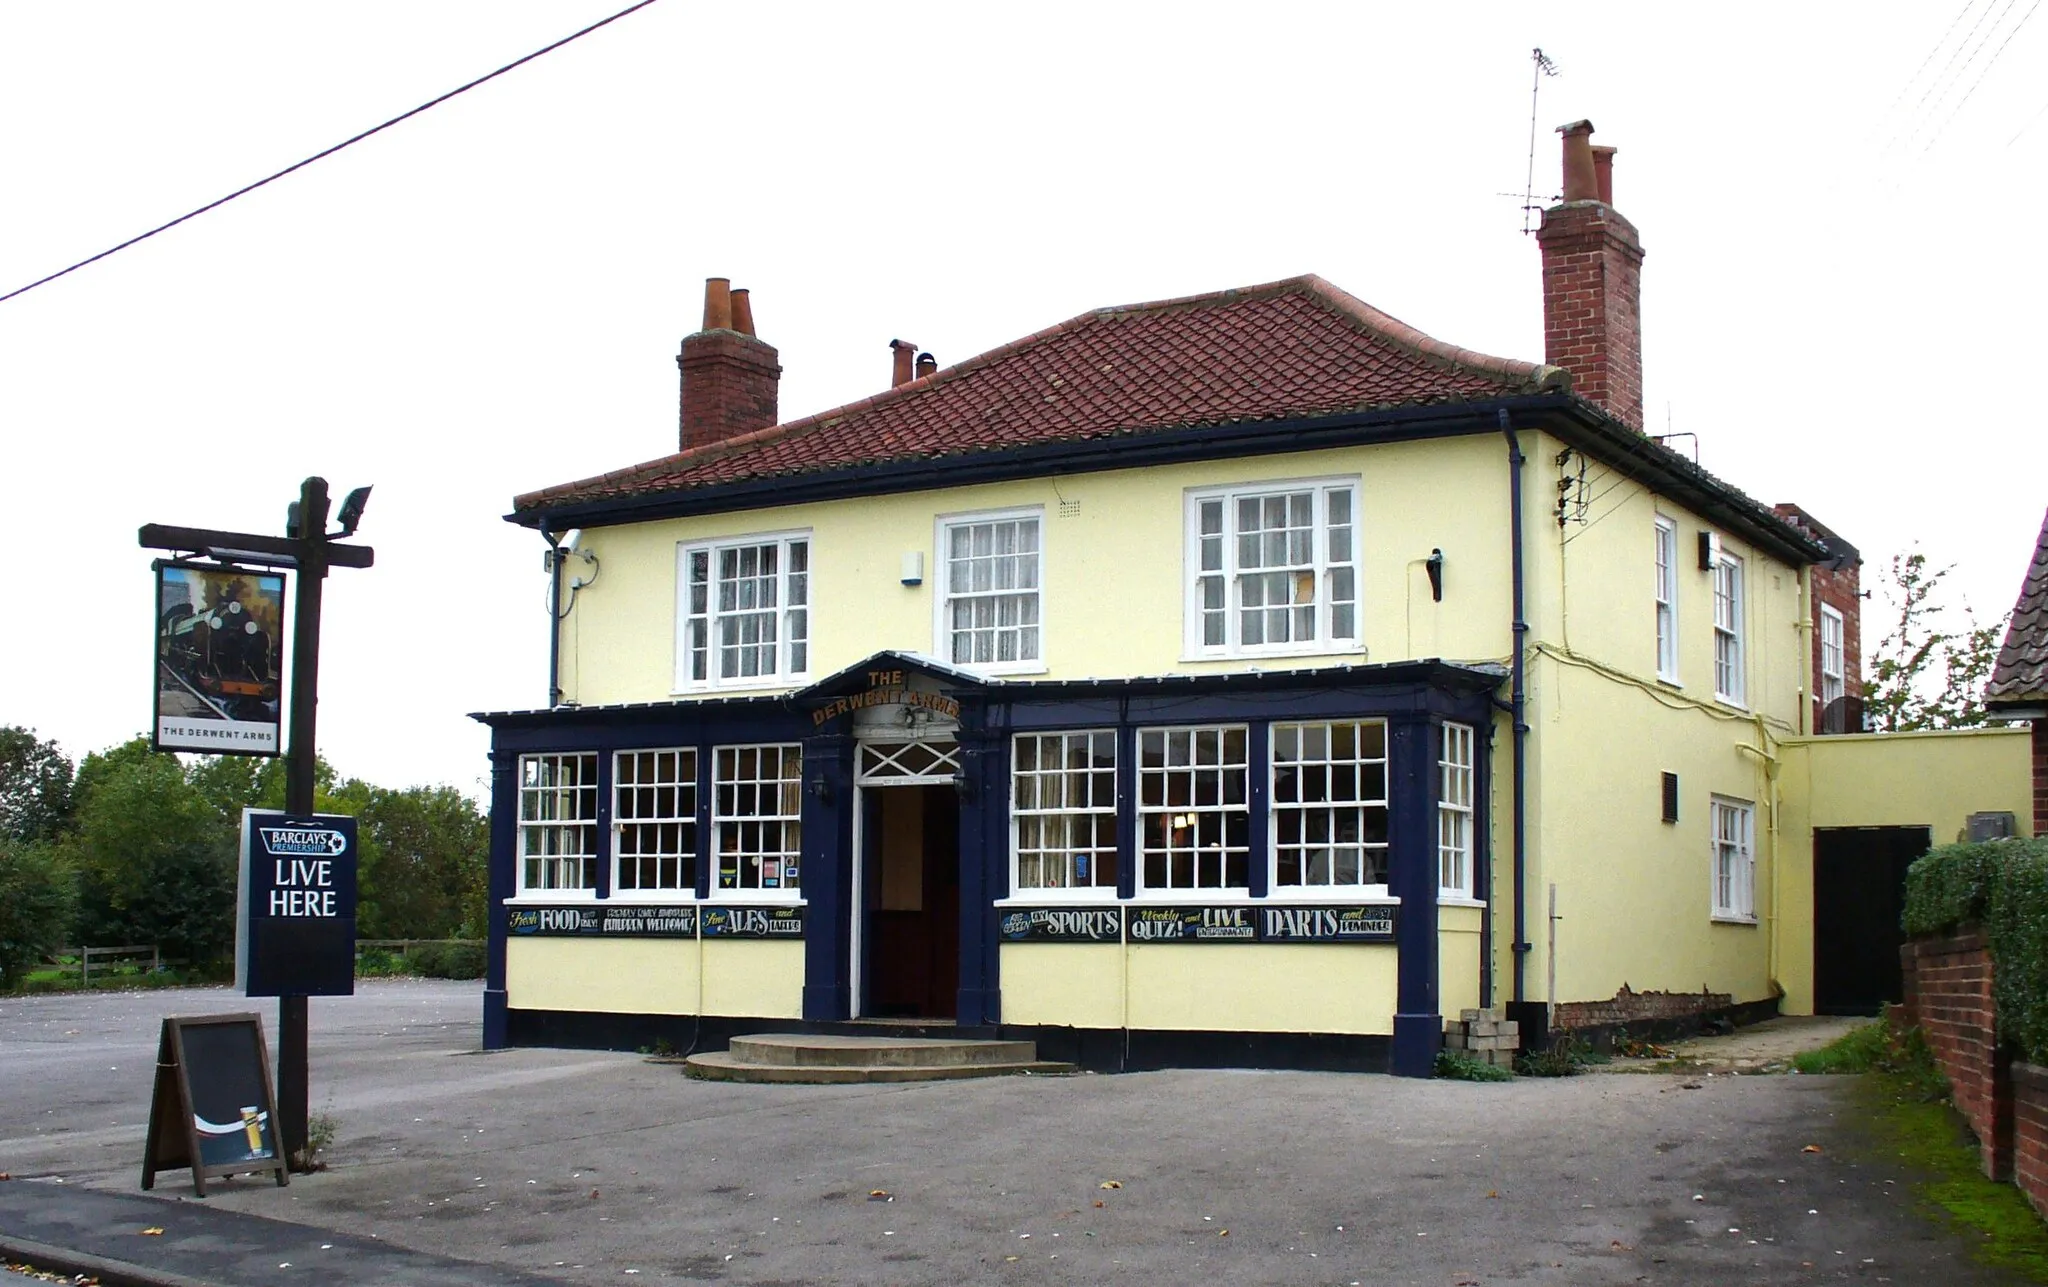 Photo showing: The Derwent Arms public house in Osbaldwick, York, UK.